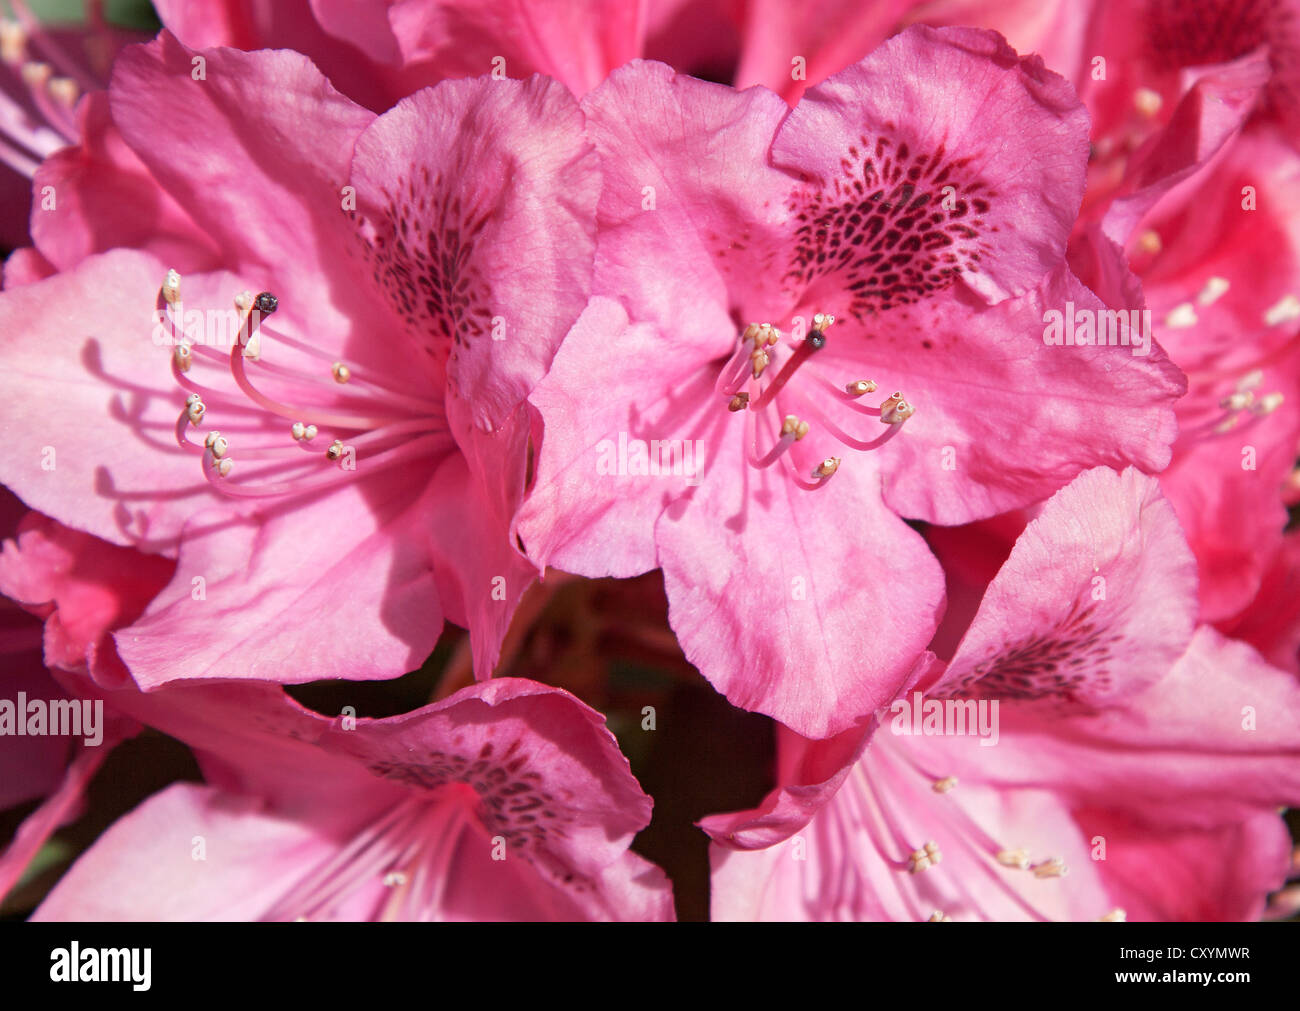 Rhododendron, blossoms, pink, pistil Stock Photo